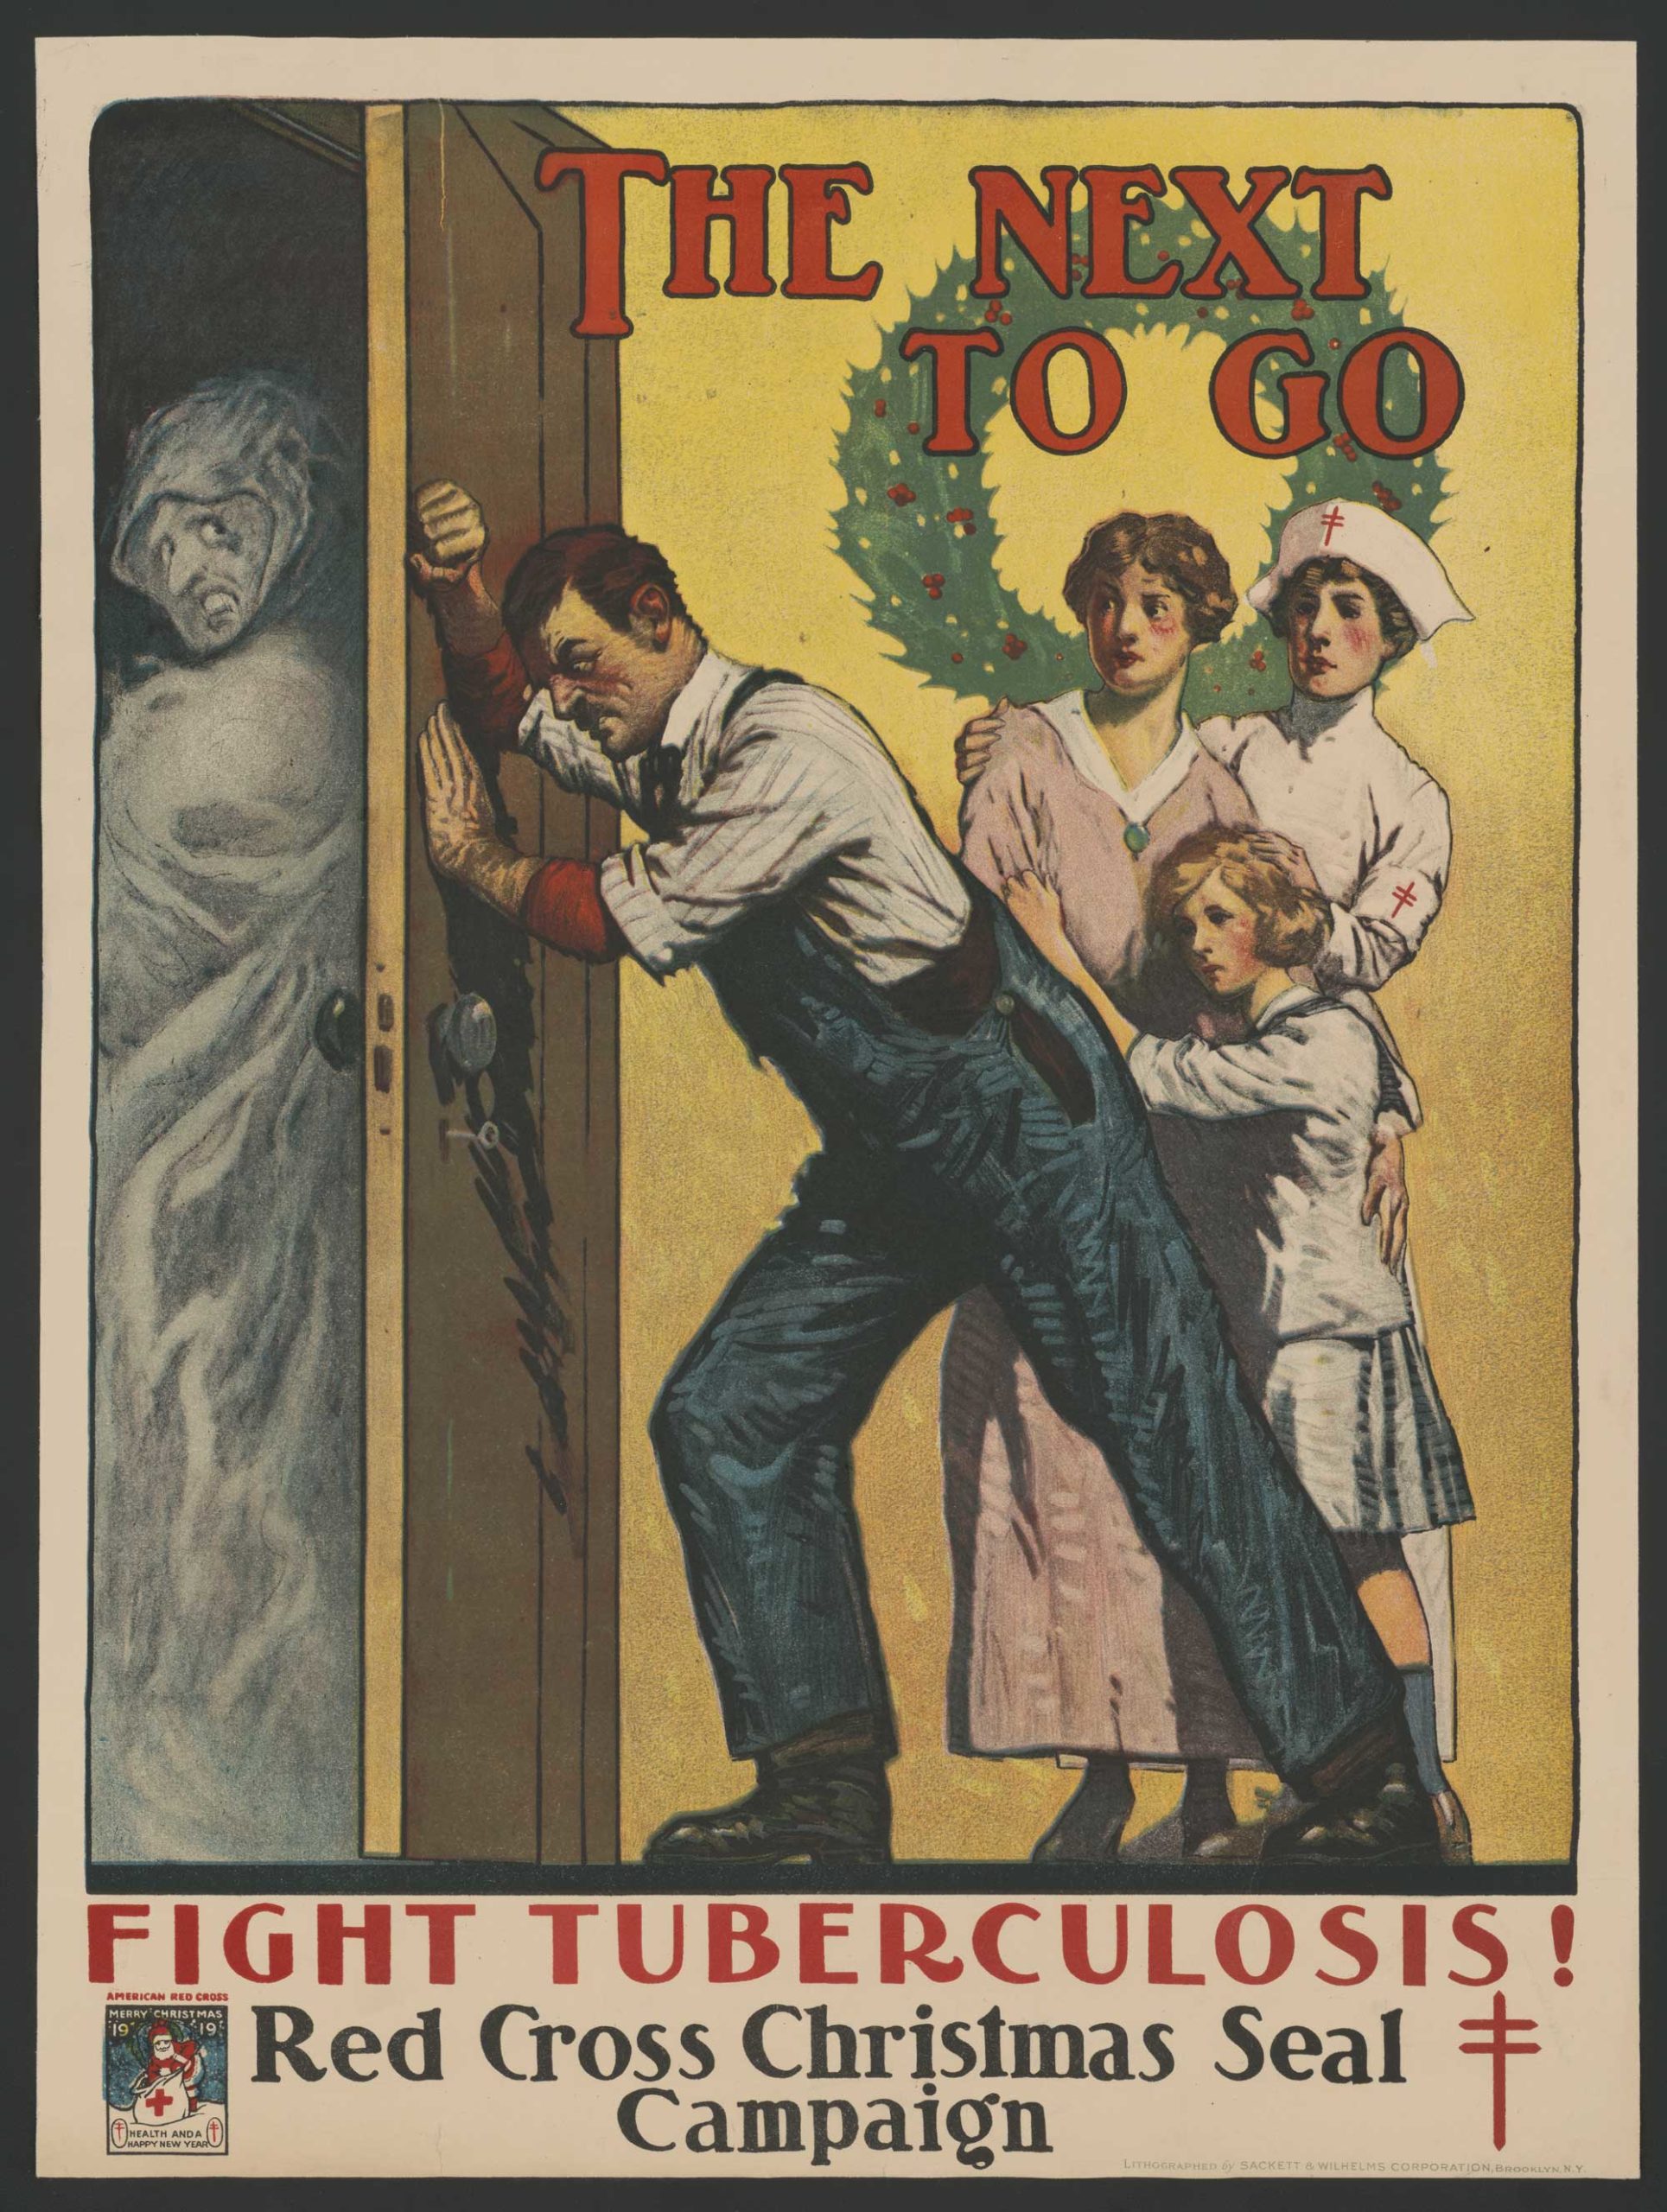 Poster showing a man closing the door against a figure representing tuberculosis